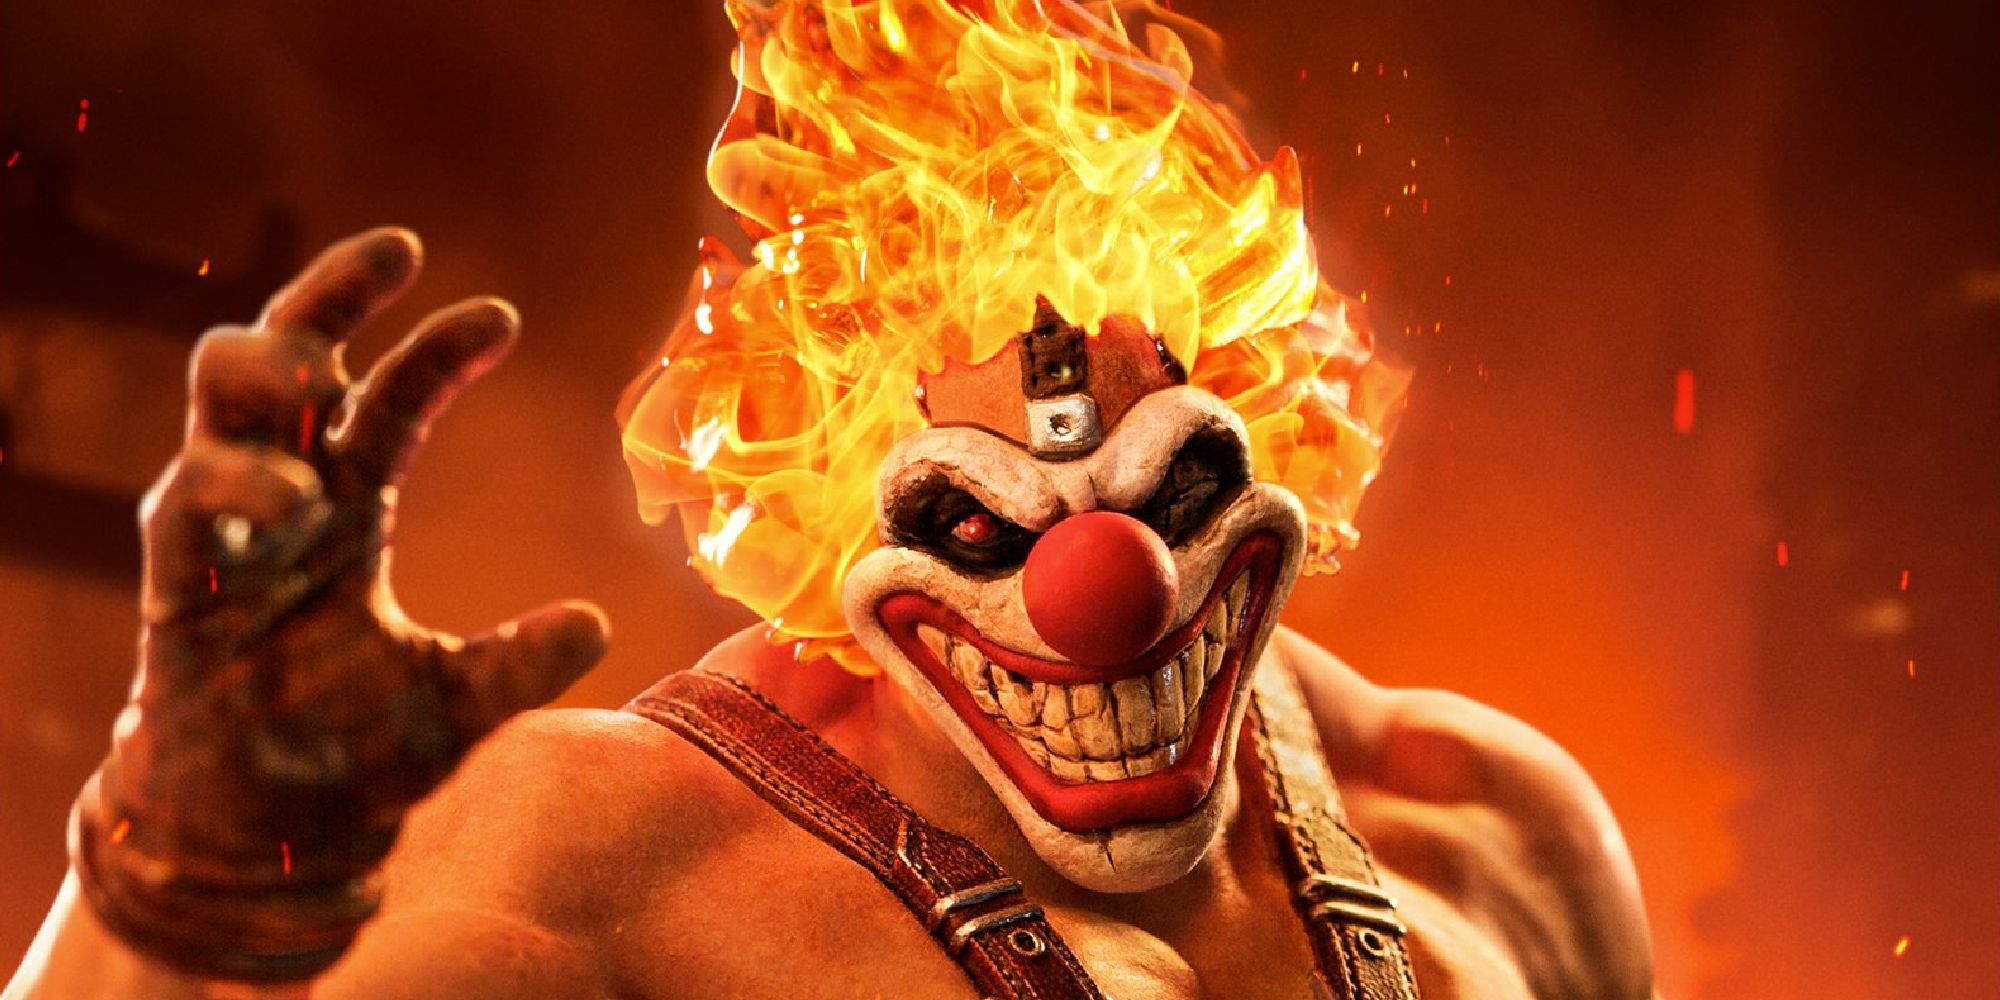 Needles Kane from Twisted Metal grins and reaches toward the camera 